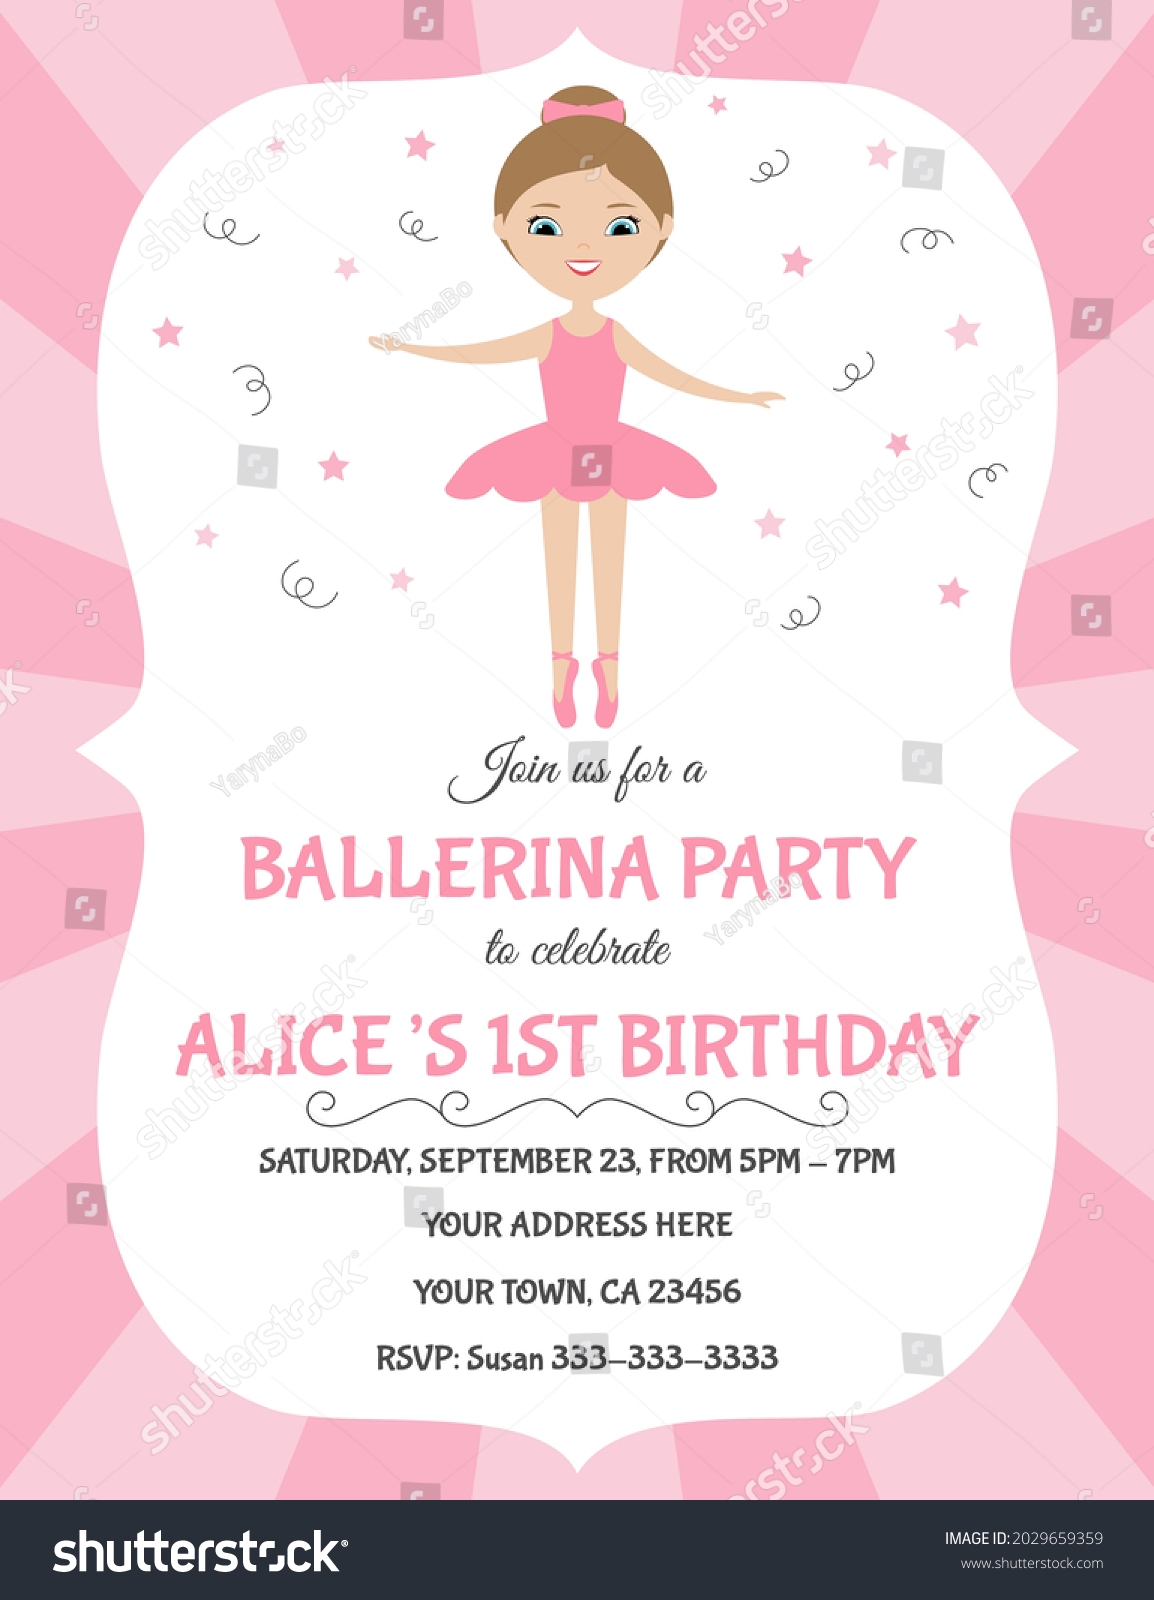 1 161 Ballerina Birthday Invitation Royalty Free Images Stock Photos Pictures Shutterstock - Free Printable Ballerina Birthday Invitations